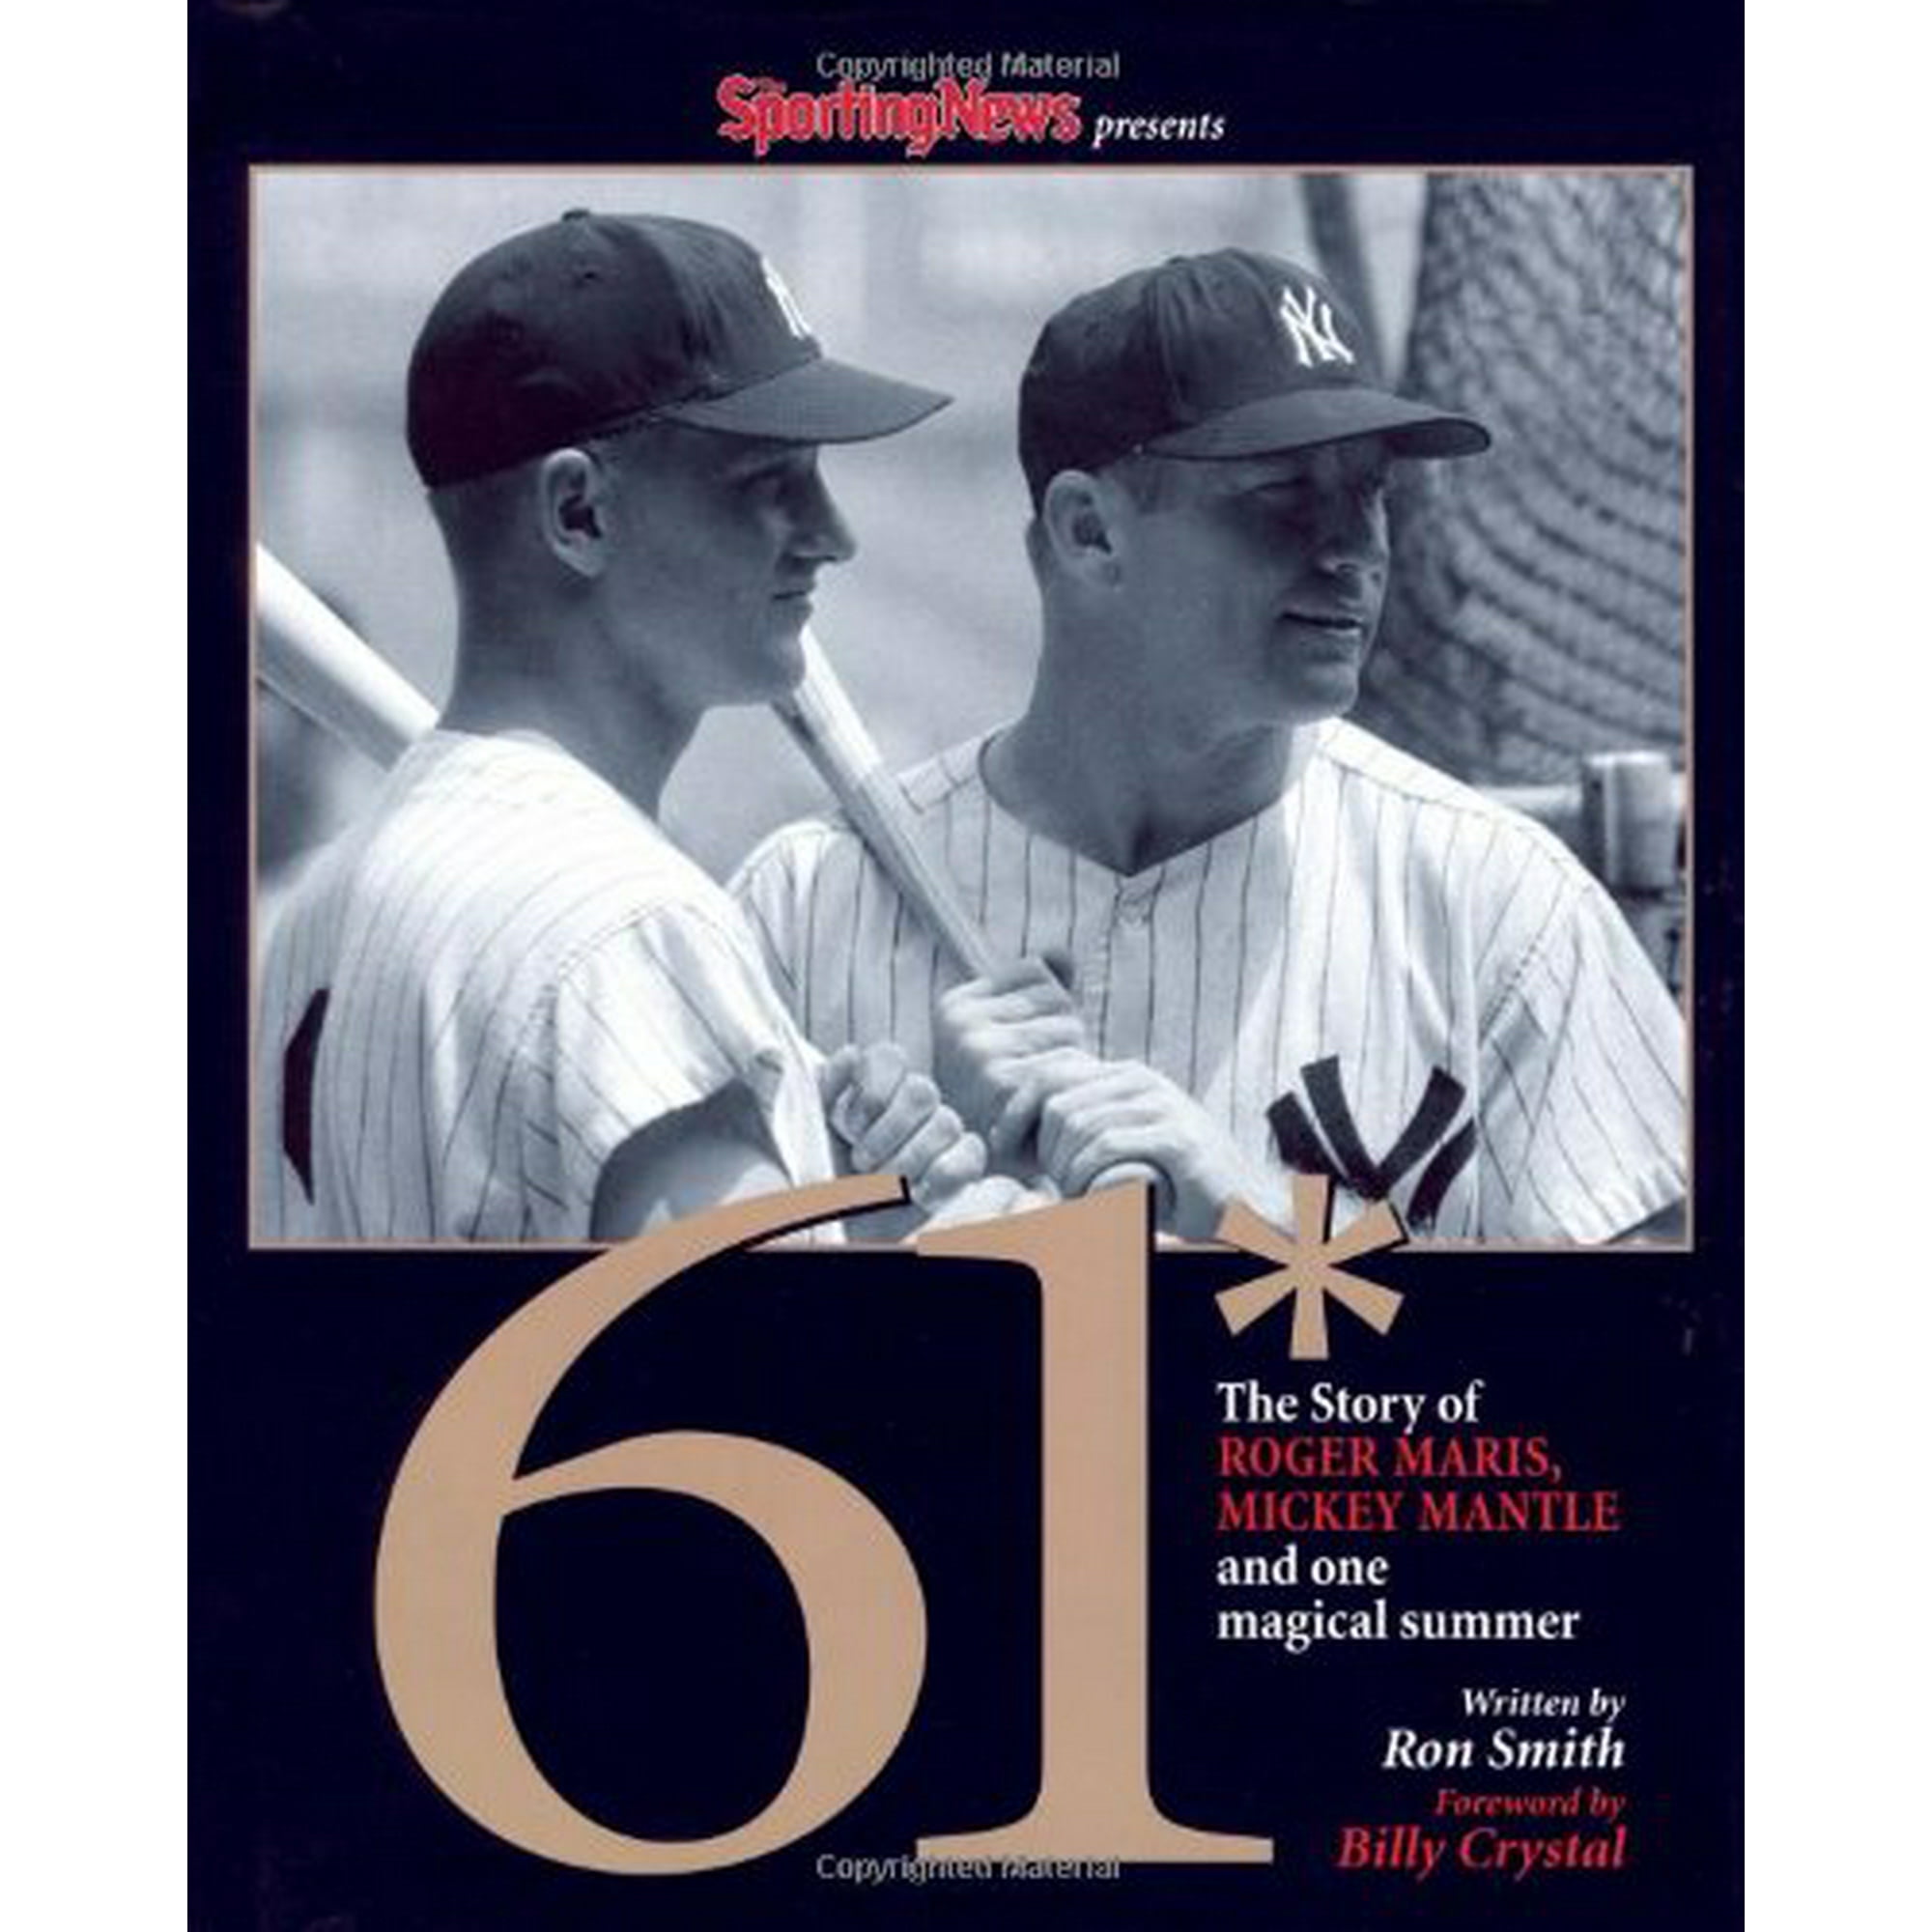 61* : The Story of Roger Maris, Mickey Mantle and One Magical Summer,  Pre-Owned Hardcover 0892046627 9780892046621 Sporting News, Ron Smith, The  Sporting News, Billy Crystal 